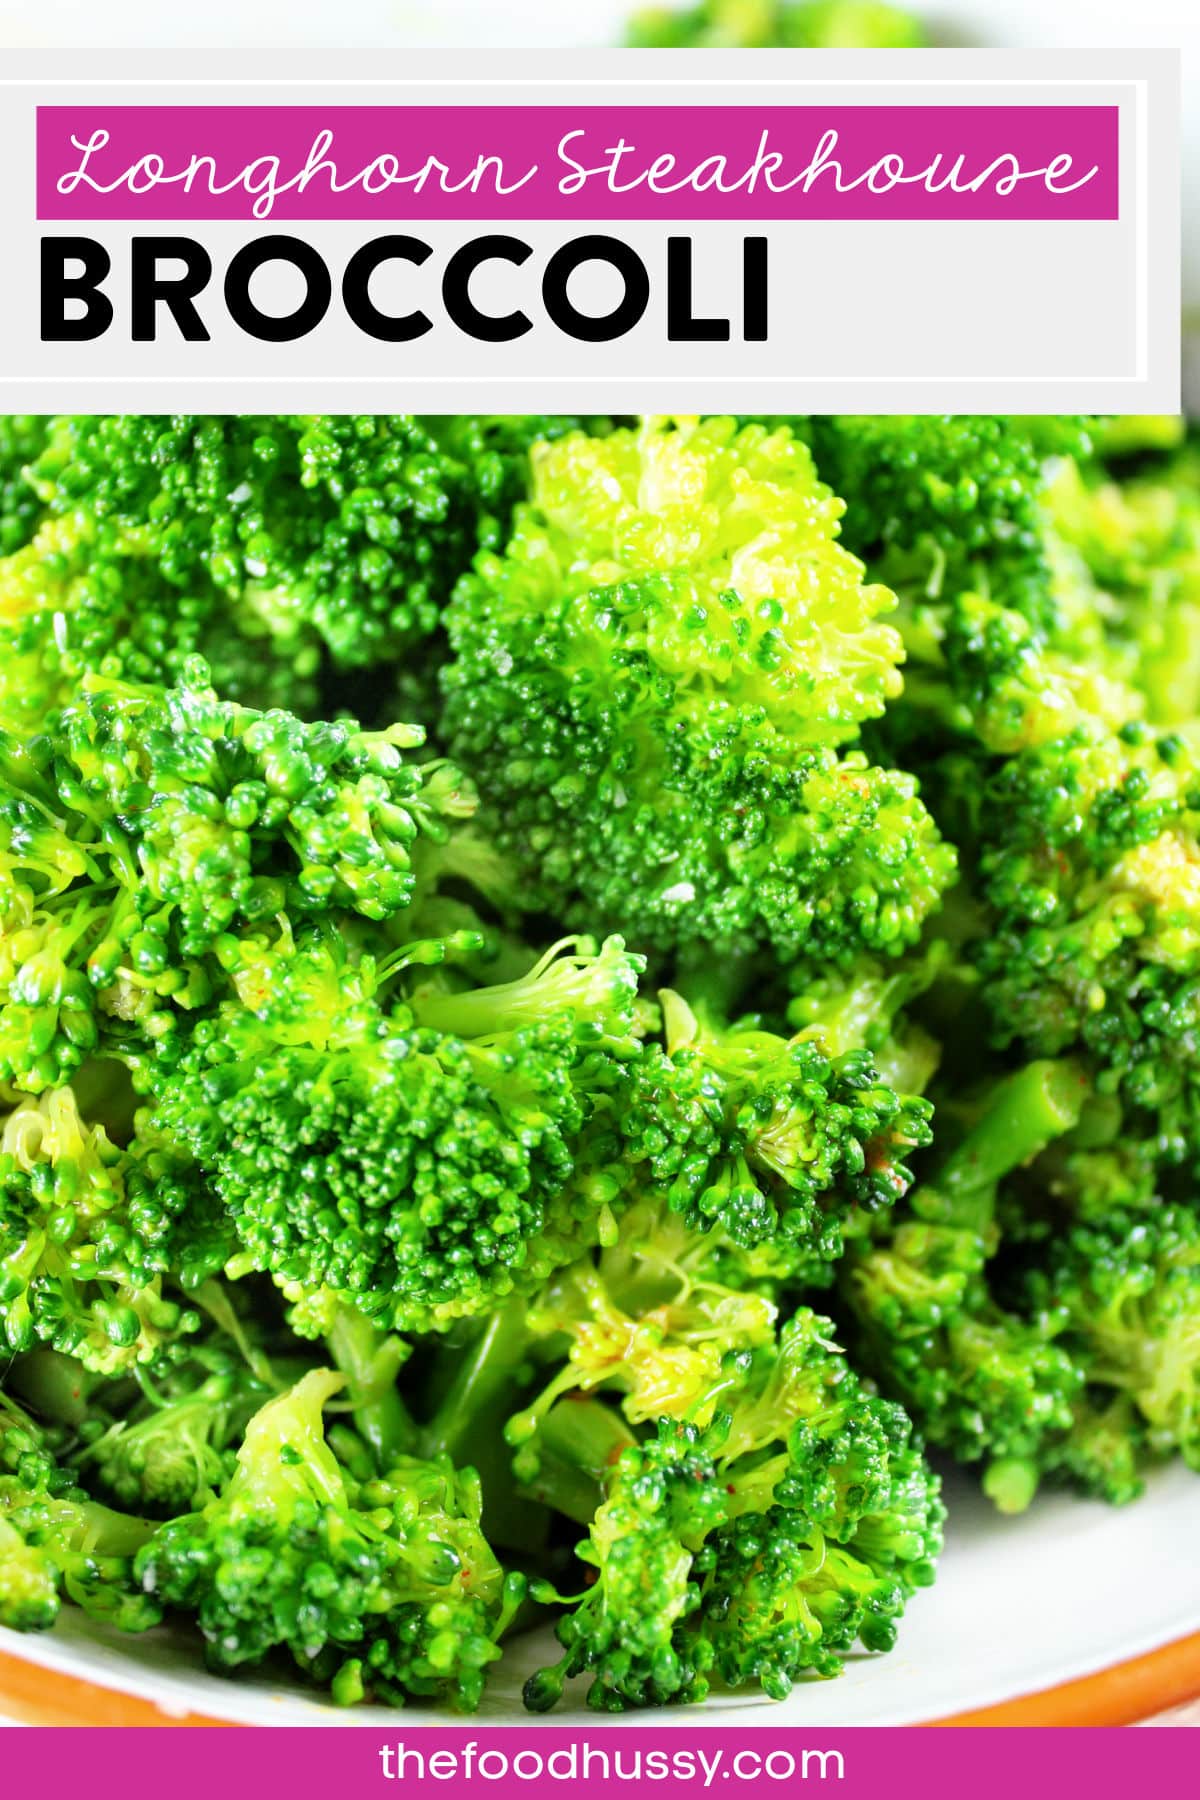 Longhorn Steakhouse Broccoli is the perfect side dish for nearly any meal! This copycat recipe will make you think you're in the booth! Of course melted butter is a great way to make every vegetable taste better!  via @foodhussy